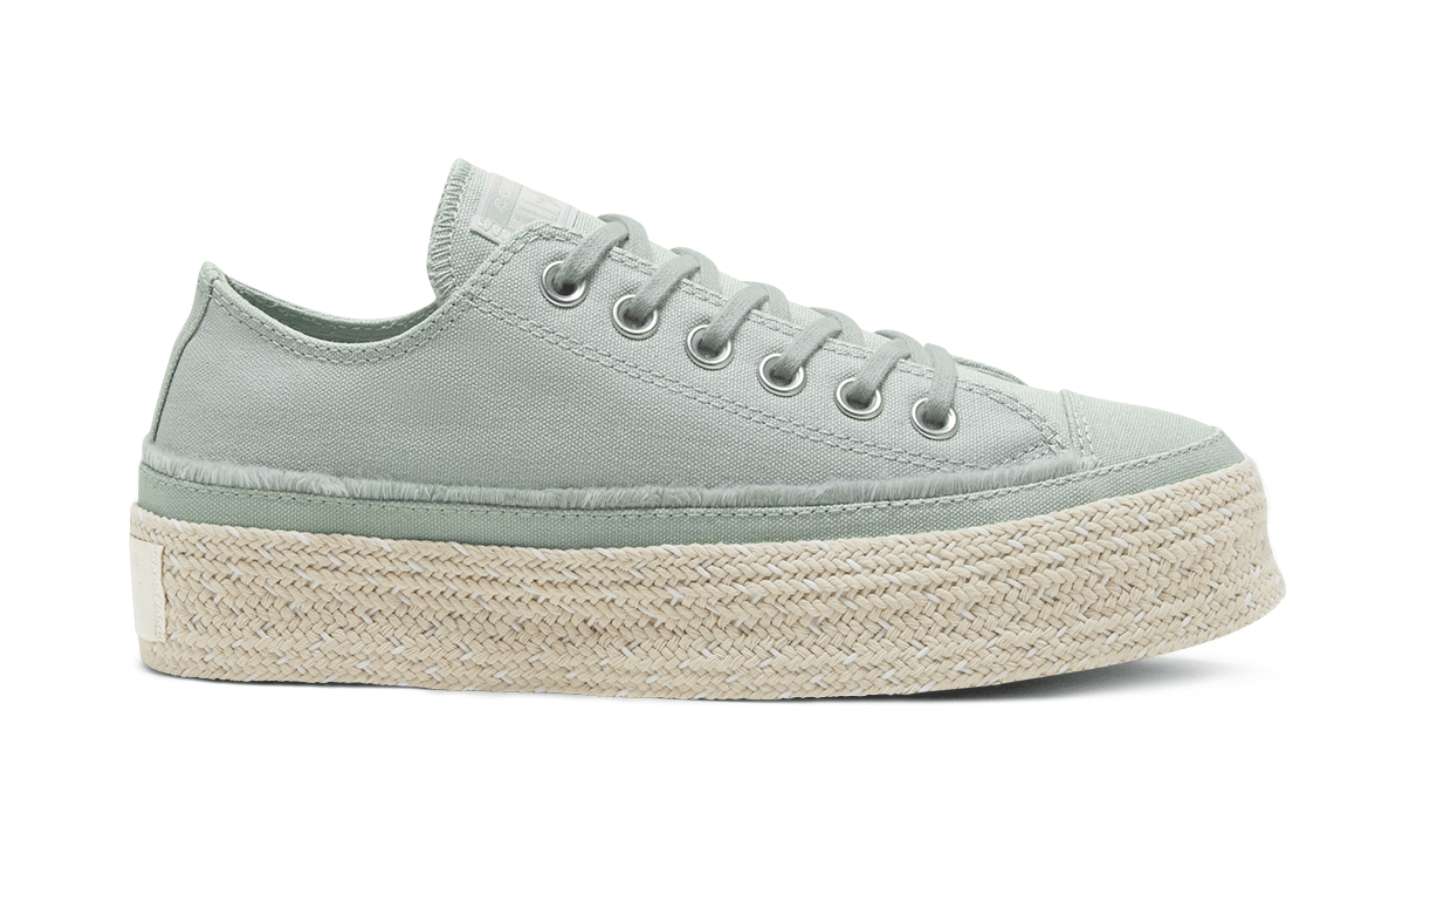 Converse Trail to Cove Espadrille Chuck Taylor All Star Low